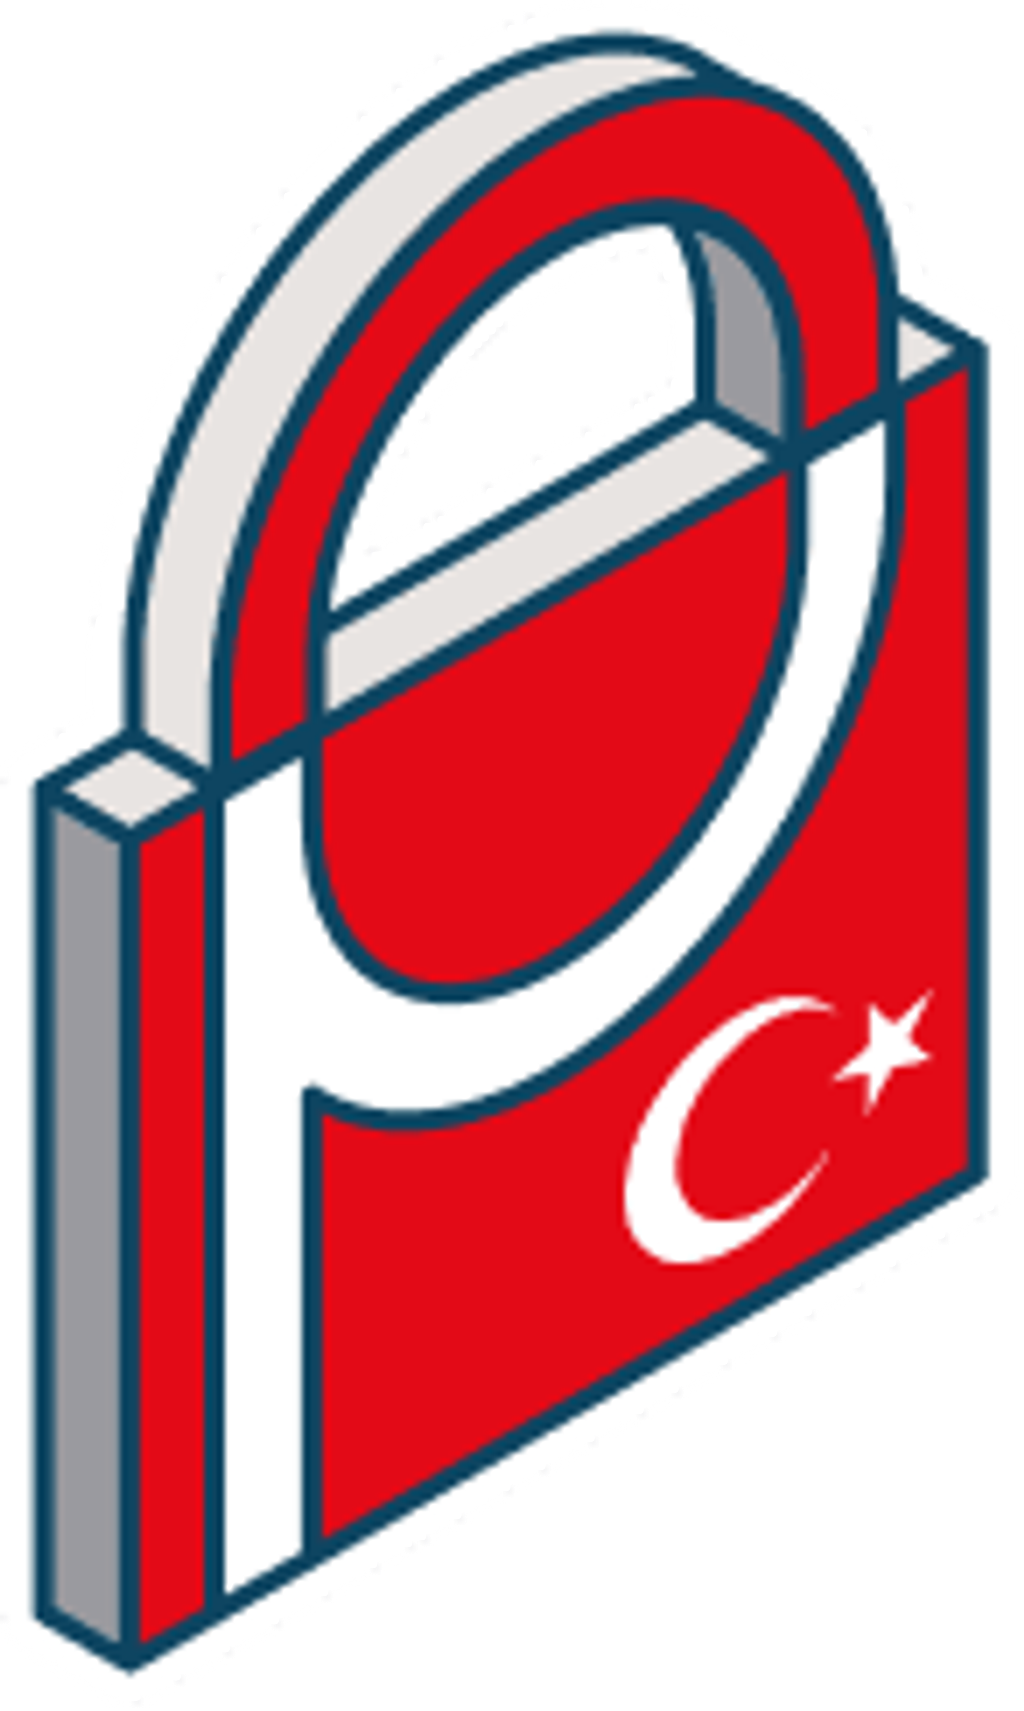 Logo in the shape of a lock representing Prighter's Turkish representation service.